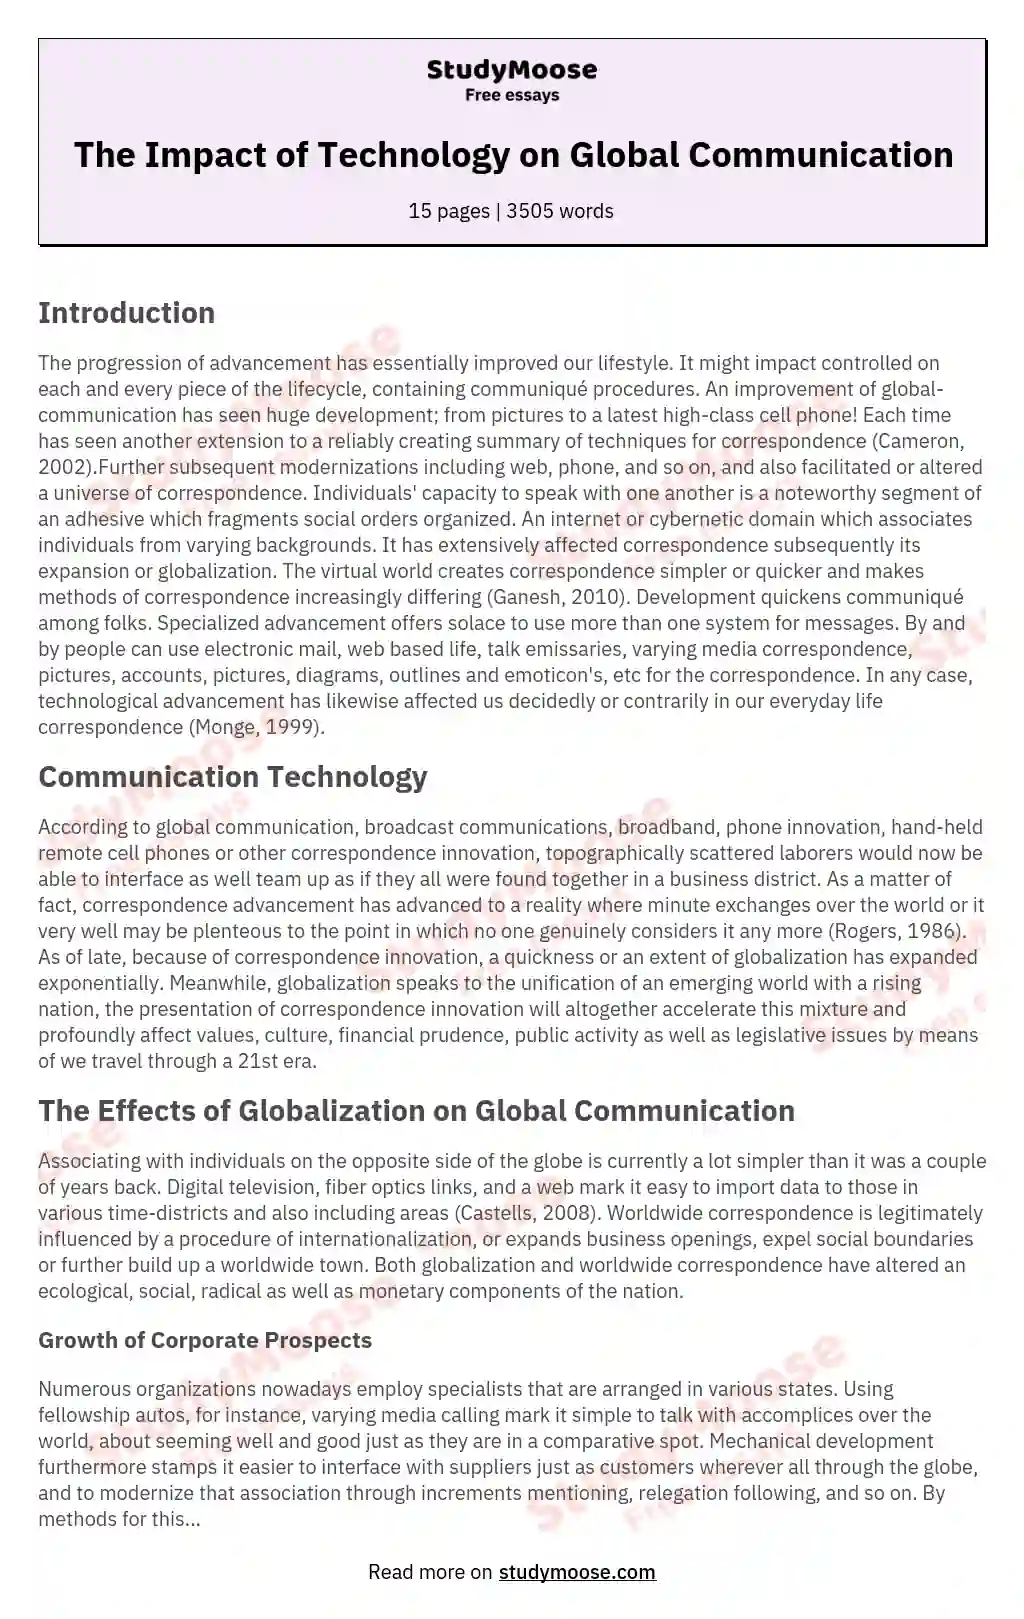 how to be a global communicator essay